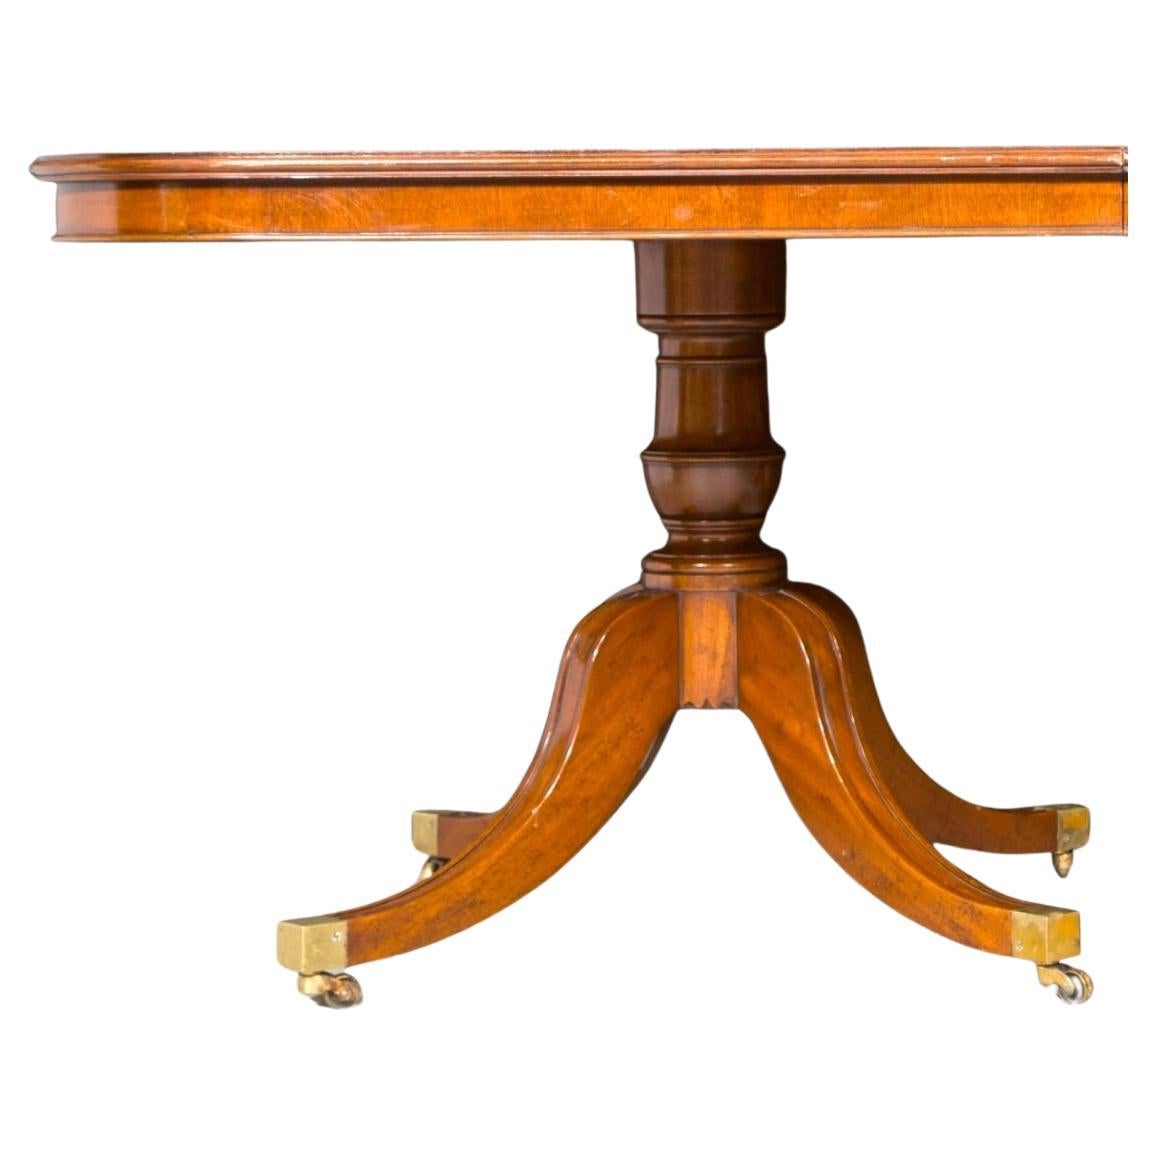 English George III Style Mahogany Double Pedestal Extending Dining Table For Sale 1